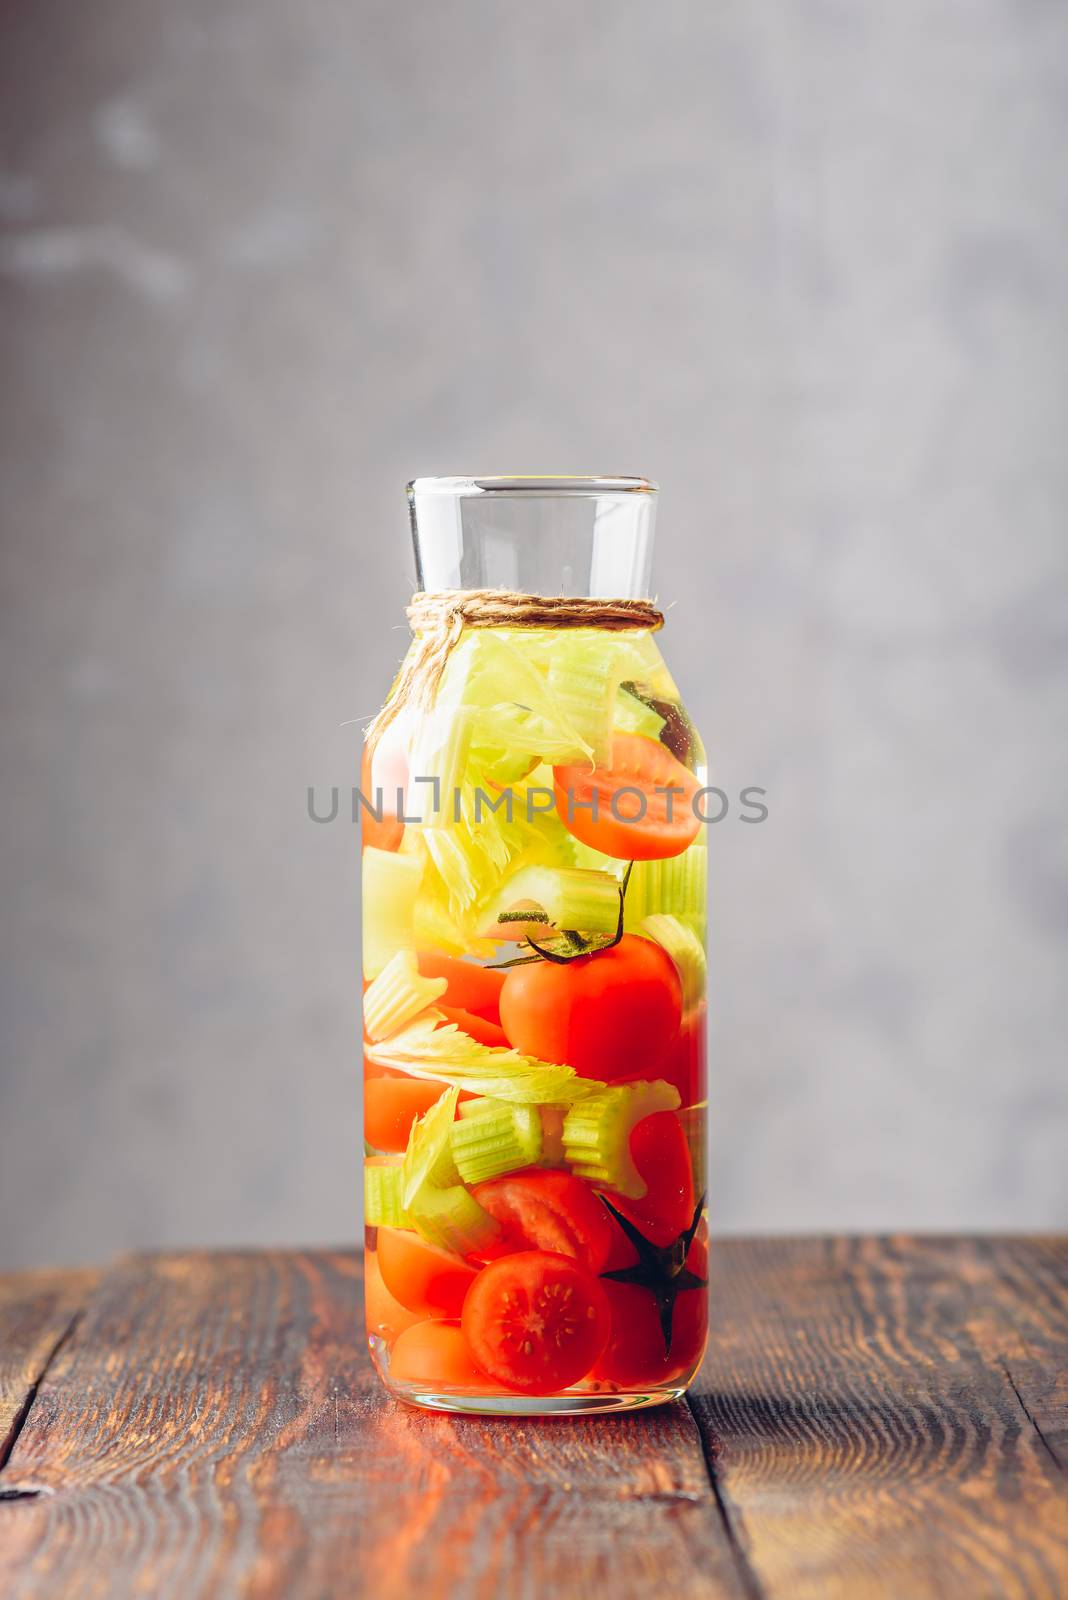 Water Flavored with Cherry Tomato and Celery Stems. Vertical Orientation.